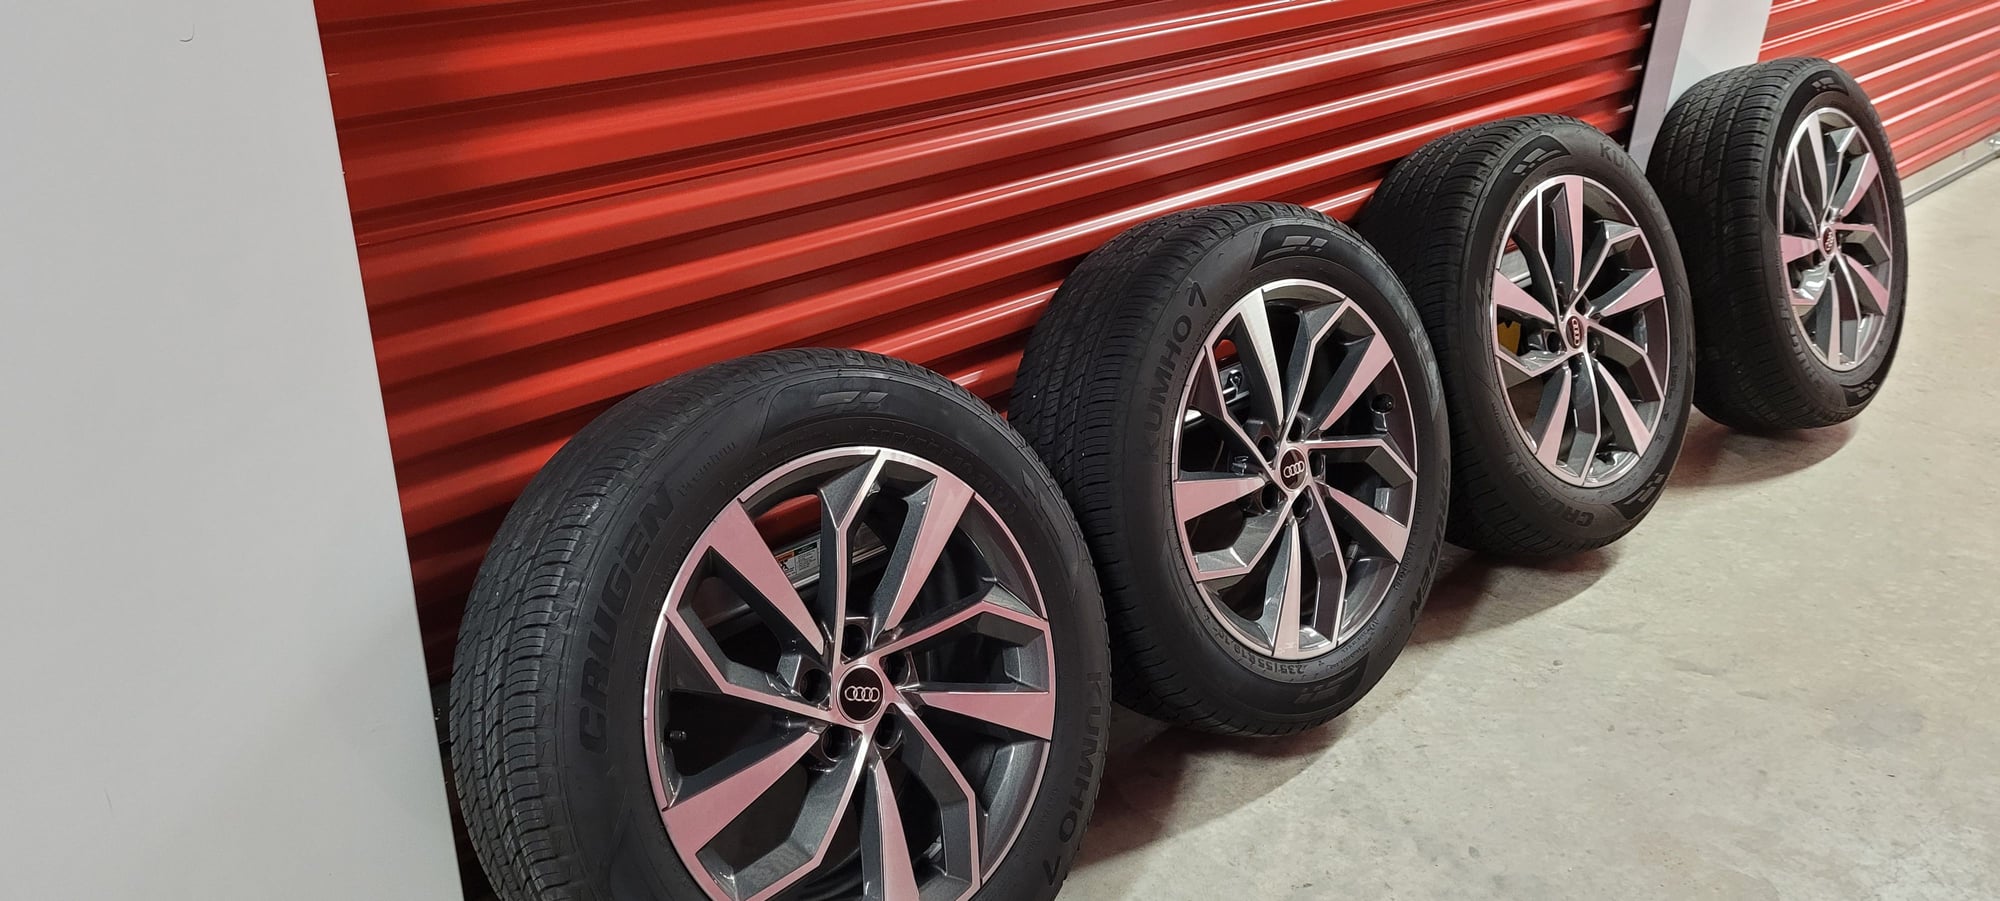 Wheels and Tires/Axles - OEM Q5 19 inch wheels/tires - Fort Worth - Like New - Used - 2022 Audi Q5 - Fort Worth, TX 76131, United States